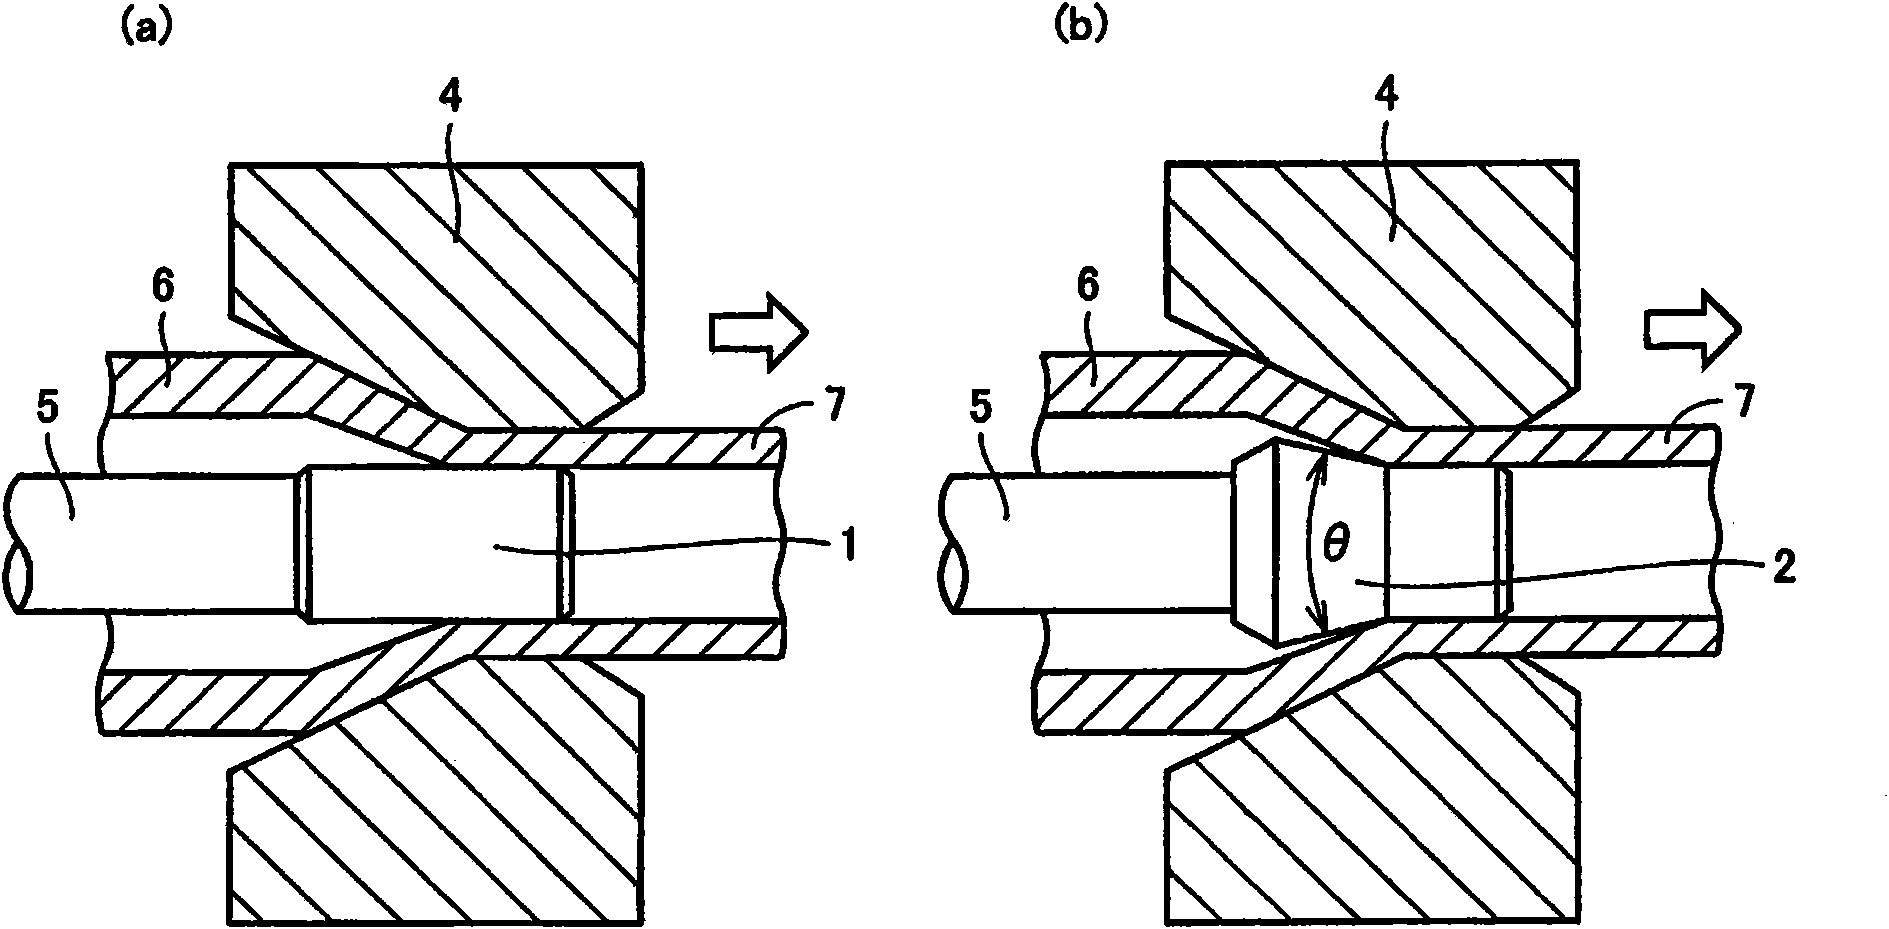 Drawing plug of pipe material and drawing method employing the plug